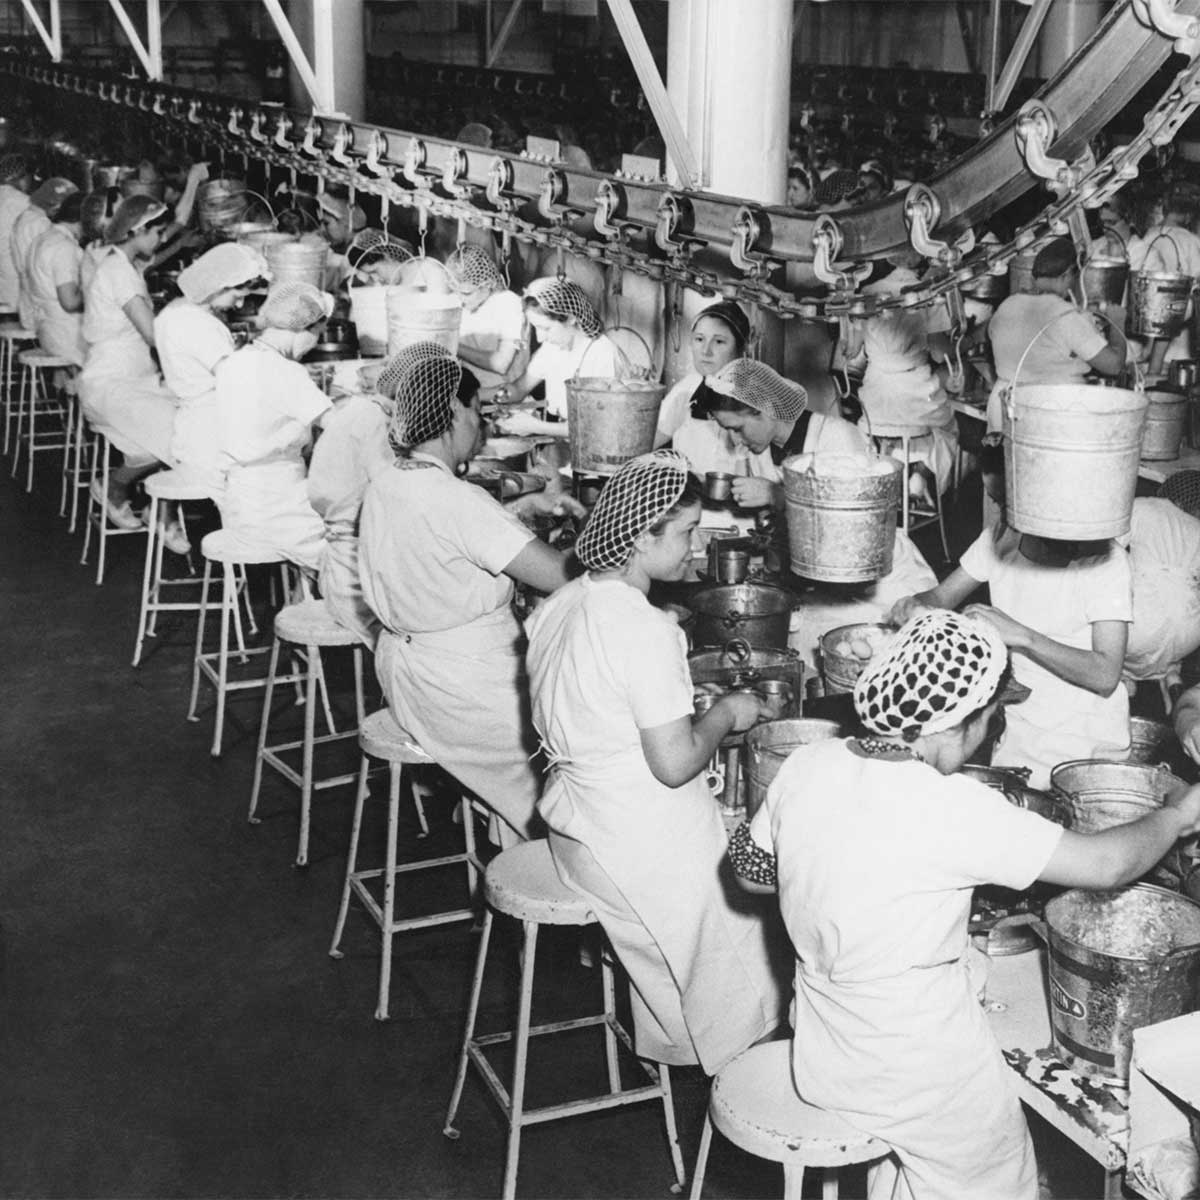 A black and white photo of women with hair-nets working on a factory assembly line.